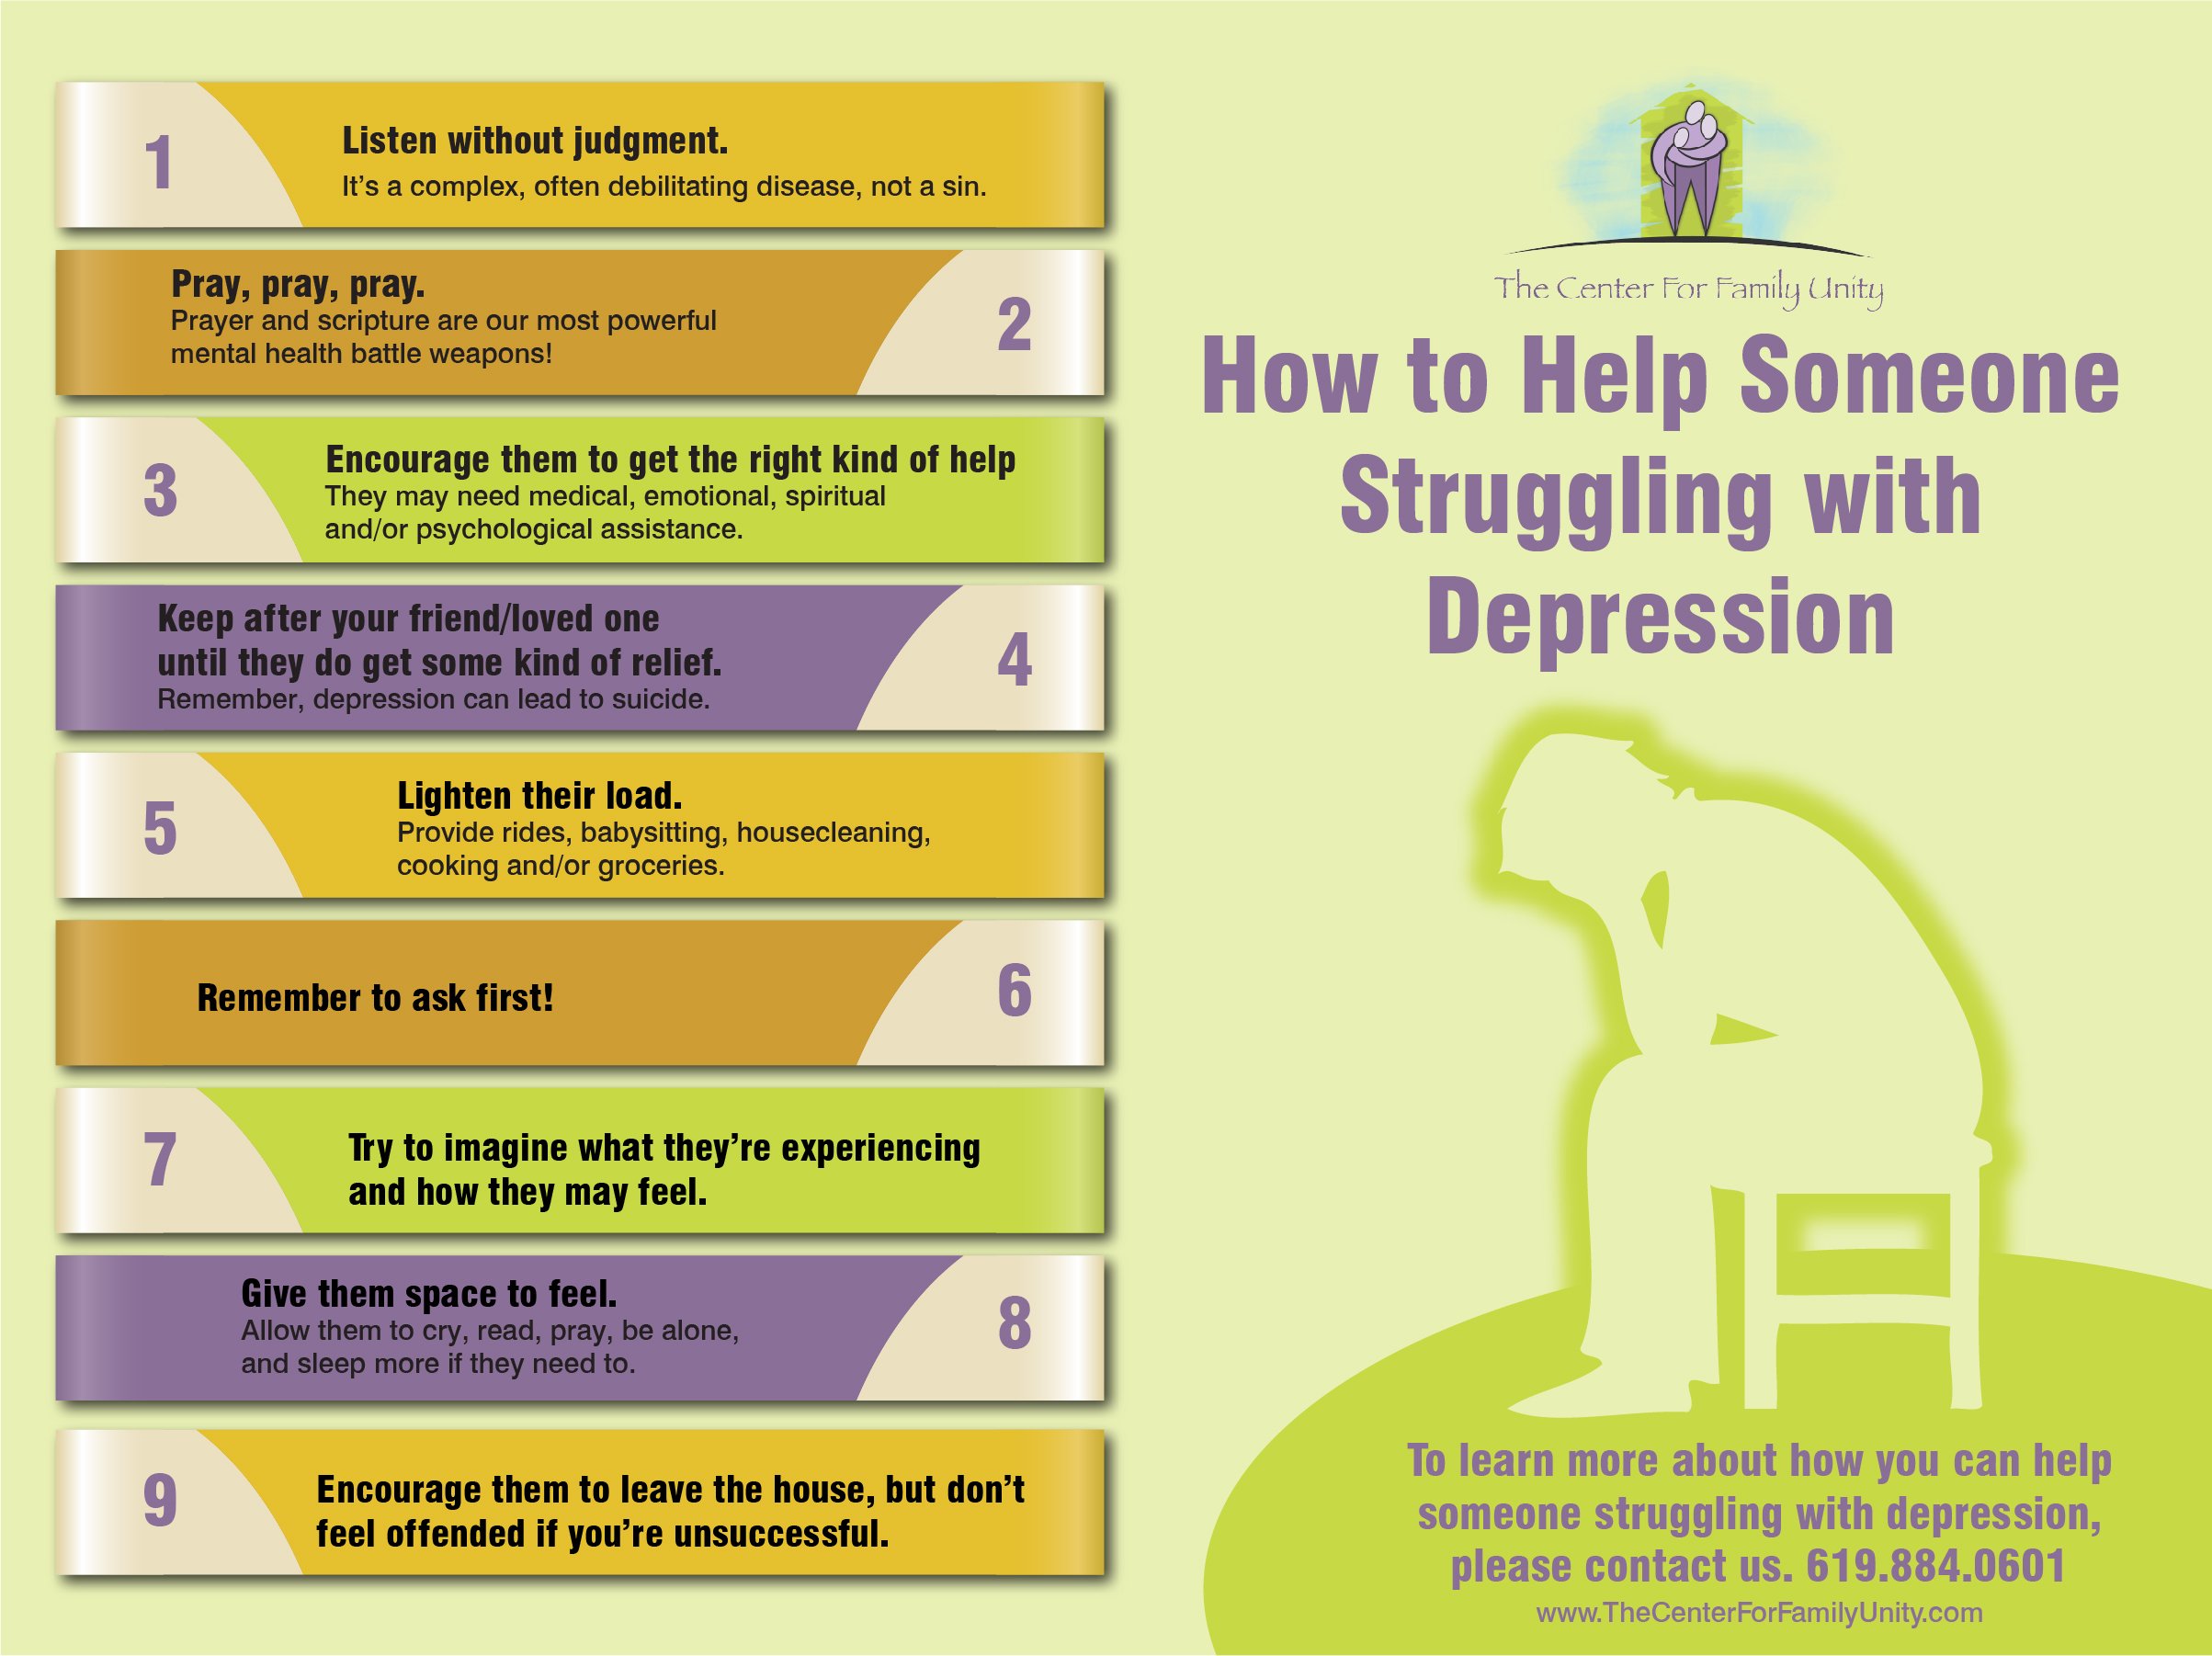 How to Help Someone Struggling with Depression